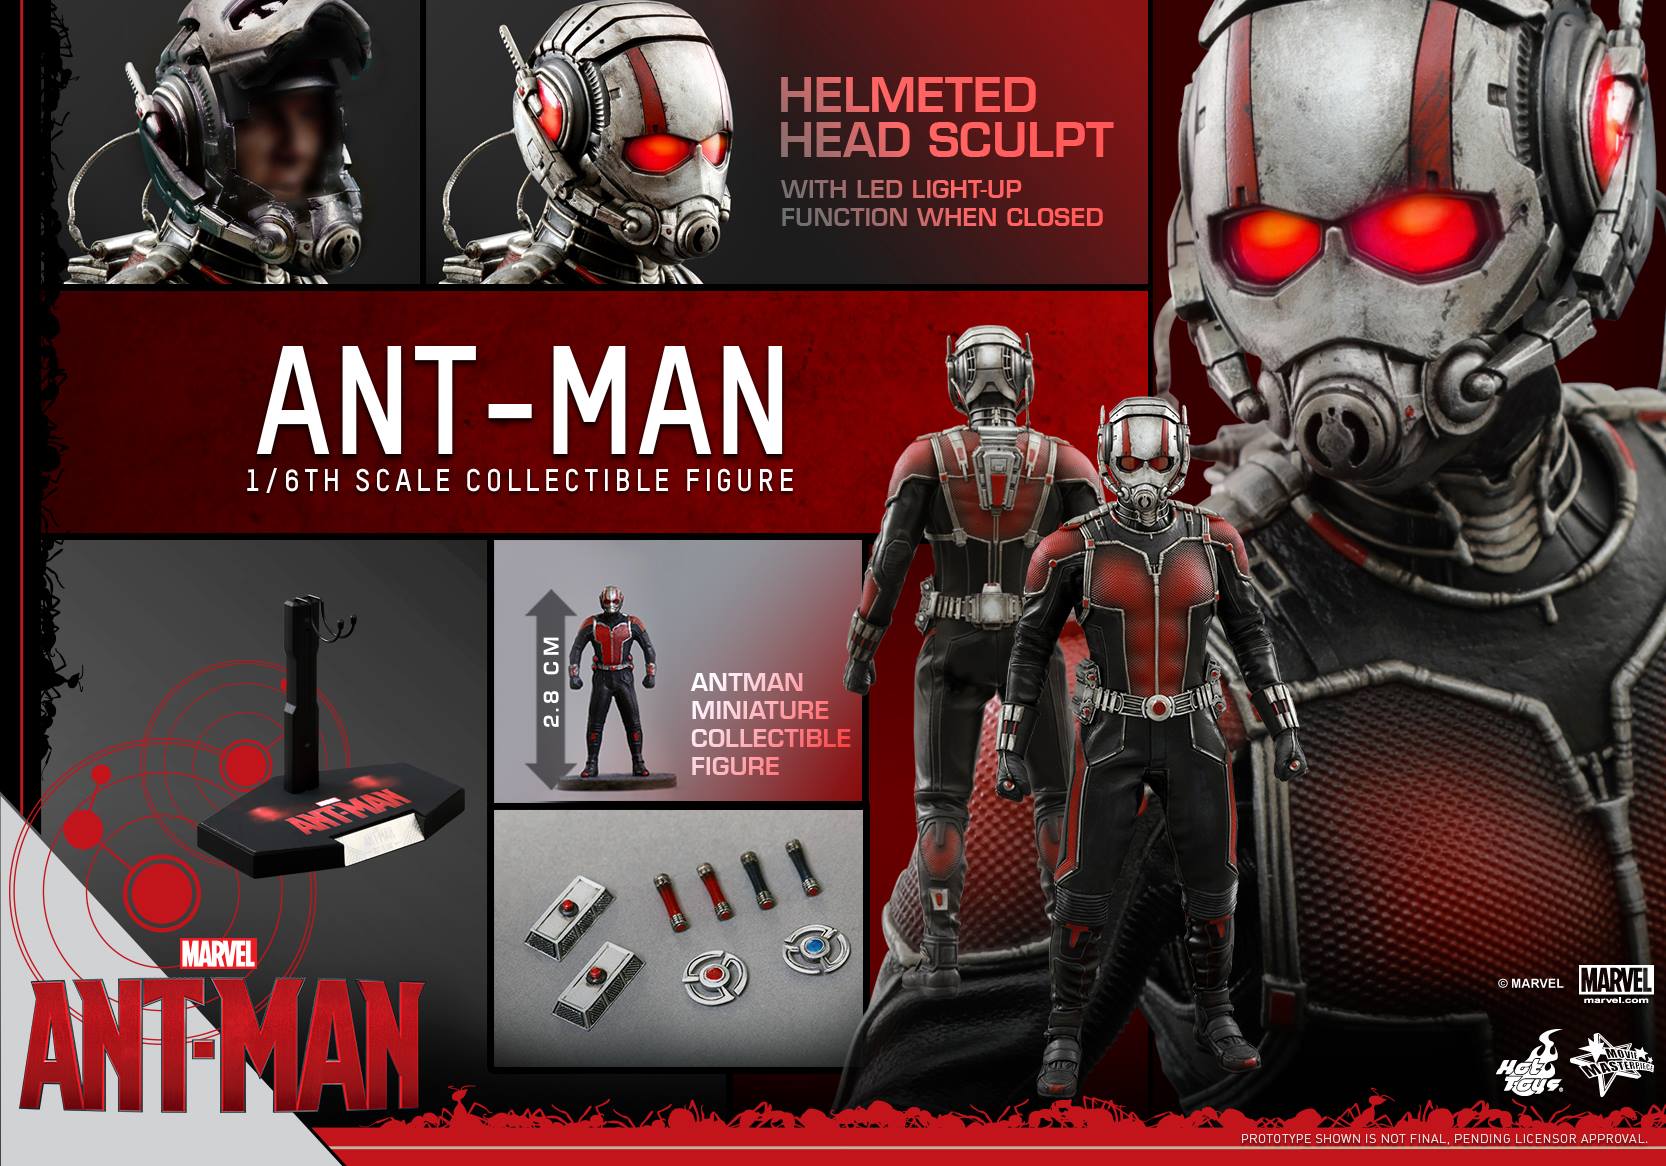 http://marveltoynews.com/wp-content/uploads/2015/07/Hot-Toys-Ant-Man-Sixth-Scale-Figure-and-Accessories.jpg